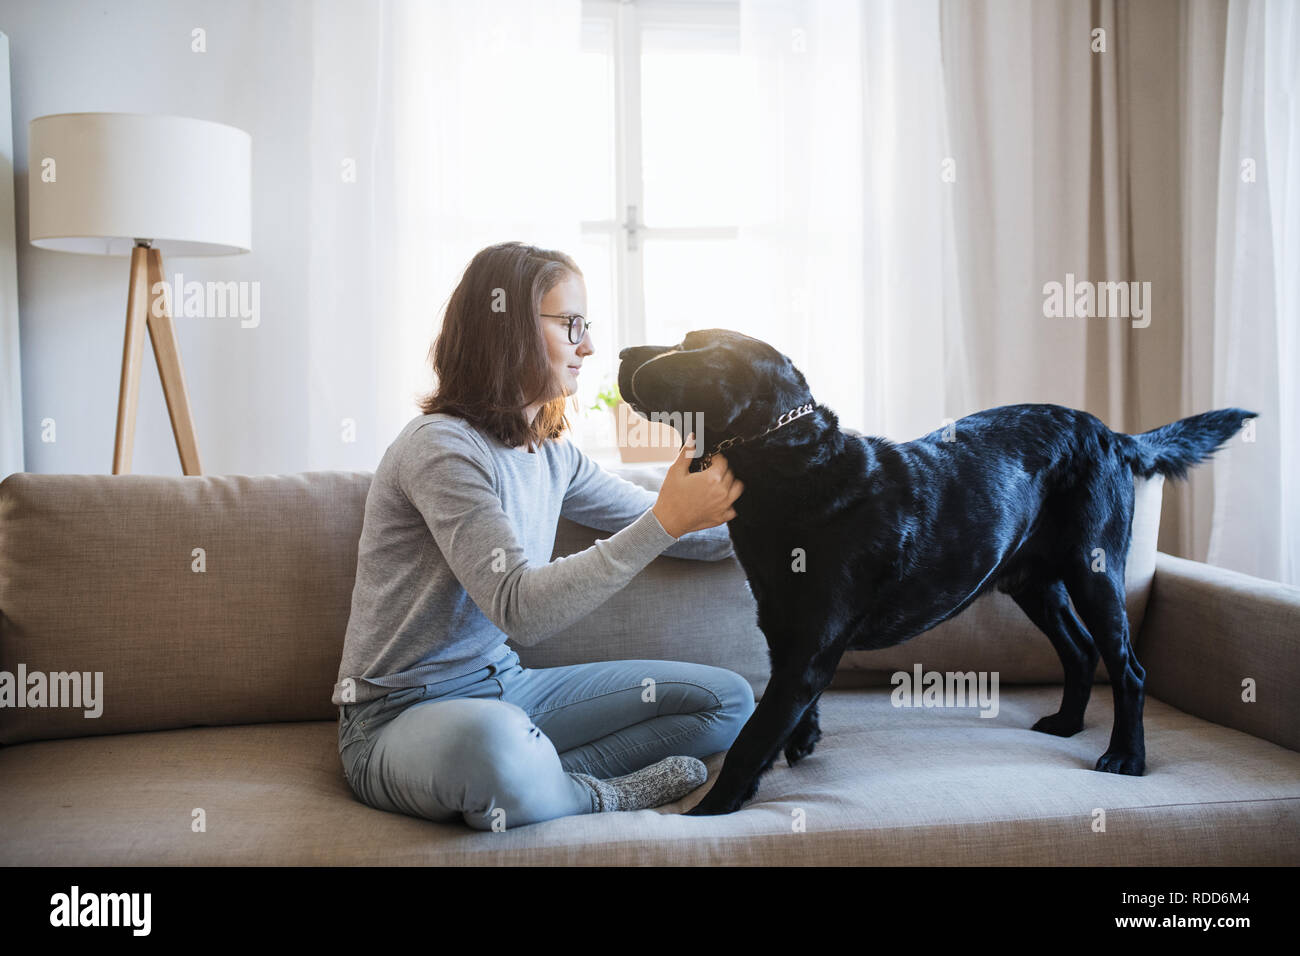 Teenage girl sitting on a sofa indoors, playing with a pet dog. Stock Photo